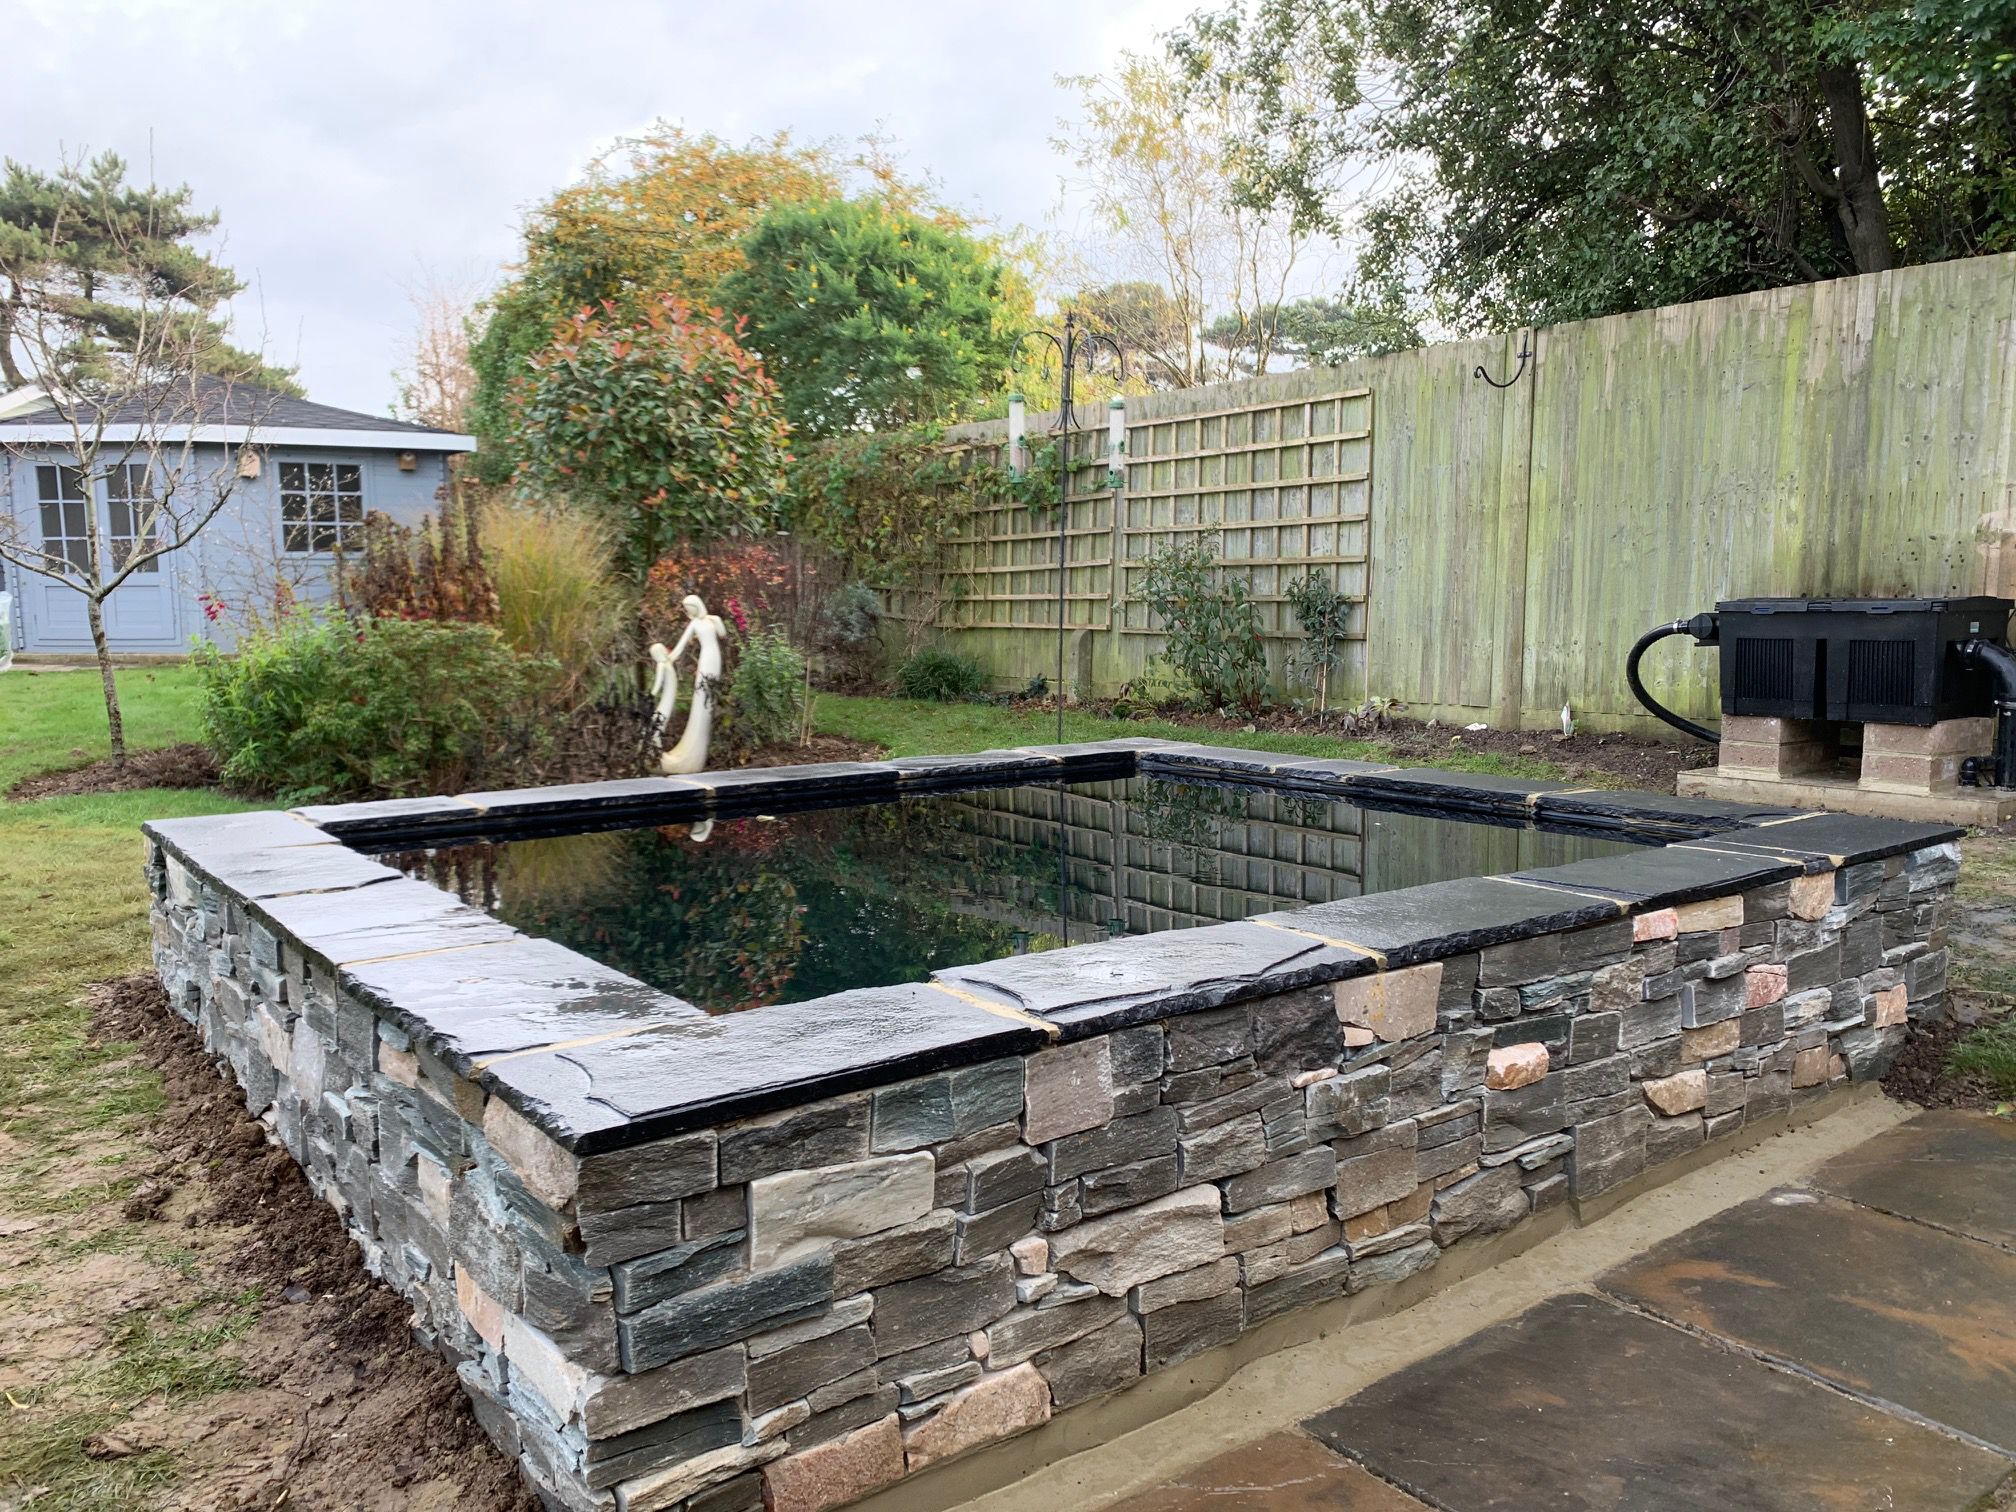 Pond cleaning services based in Sussex